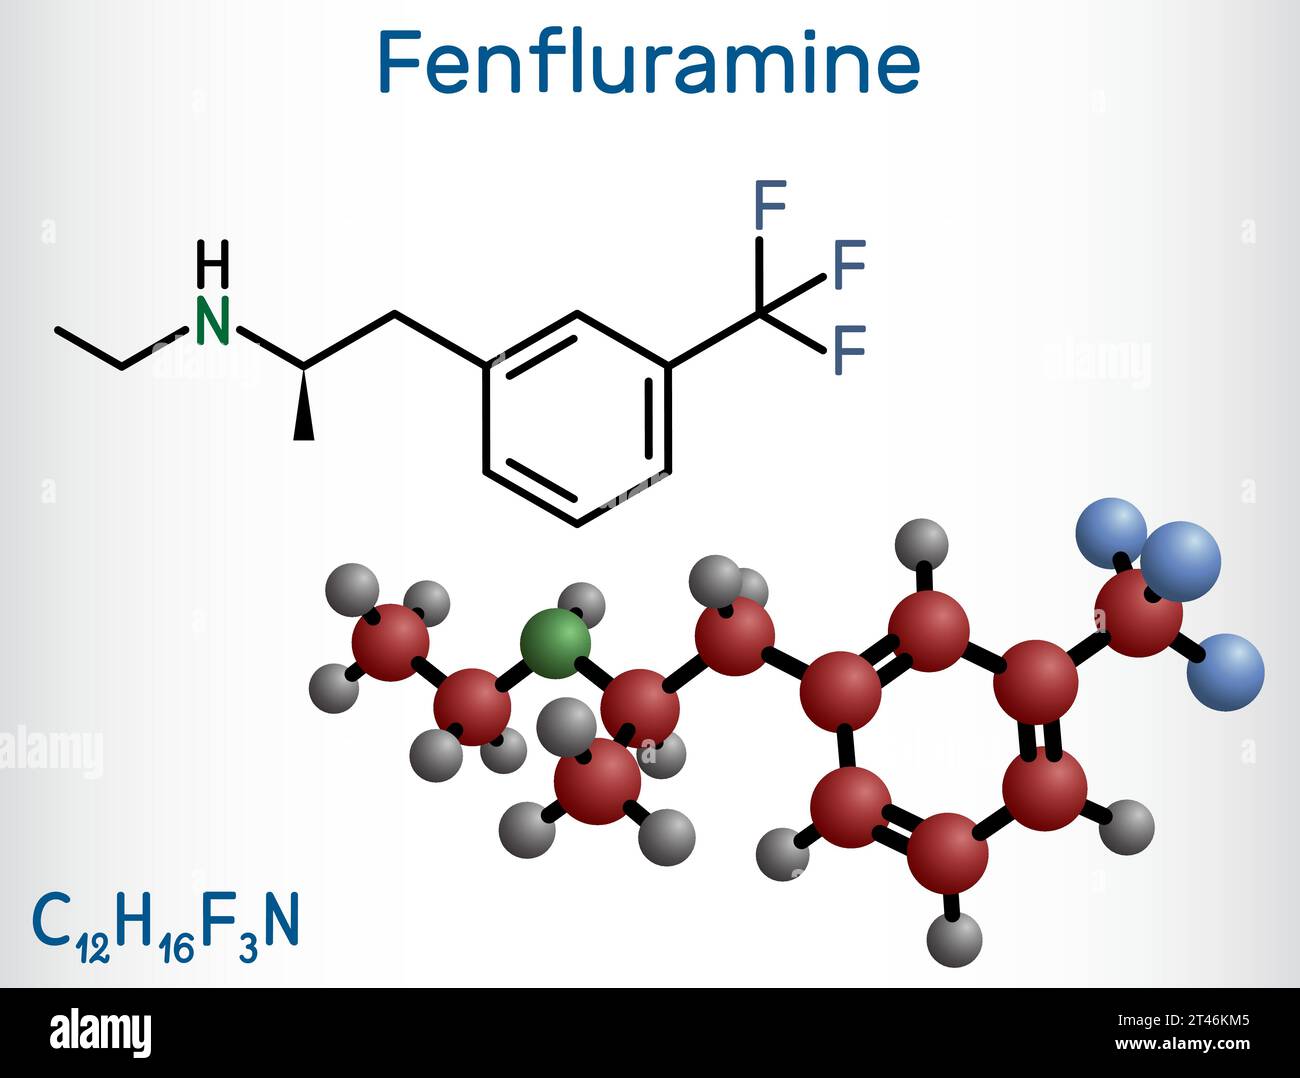 Fenfluramine drug molecule. It is phenethylamine, used as an appetite suppressant. Structural chemical formula and molecule model. Vector illustration Stock Vector